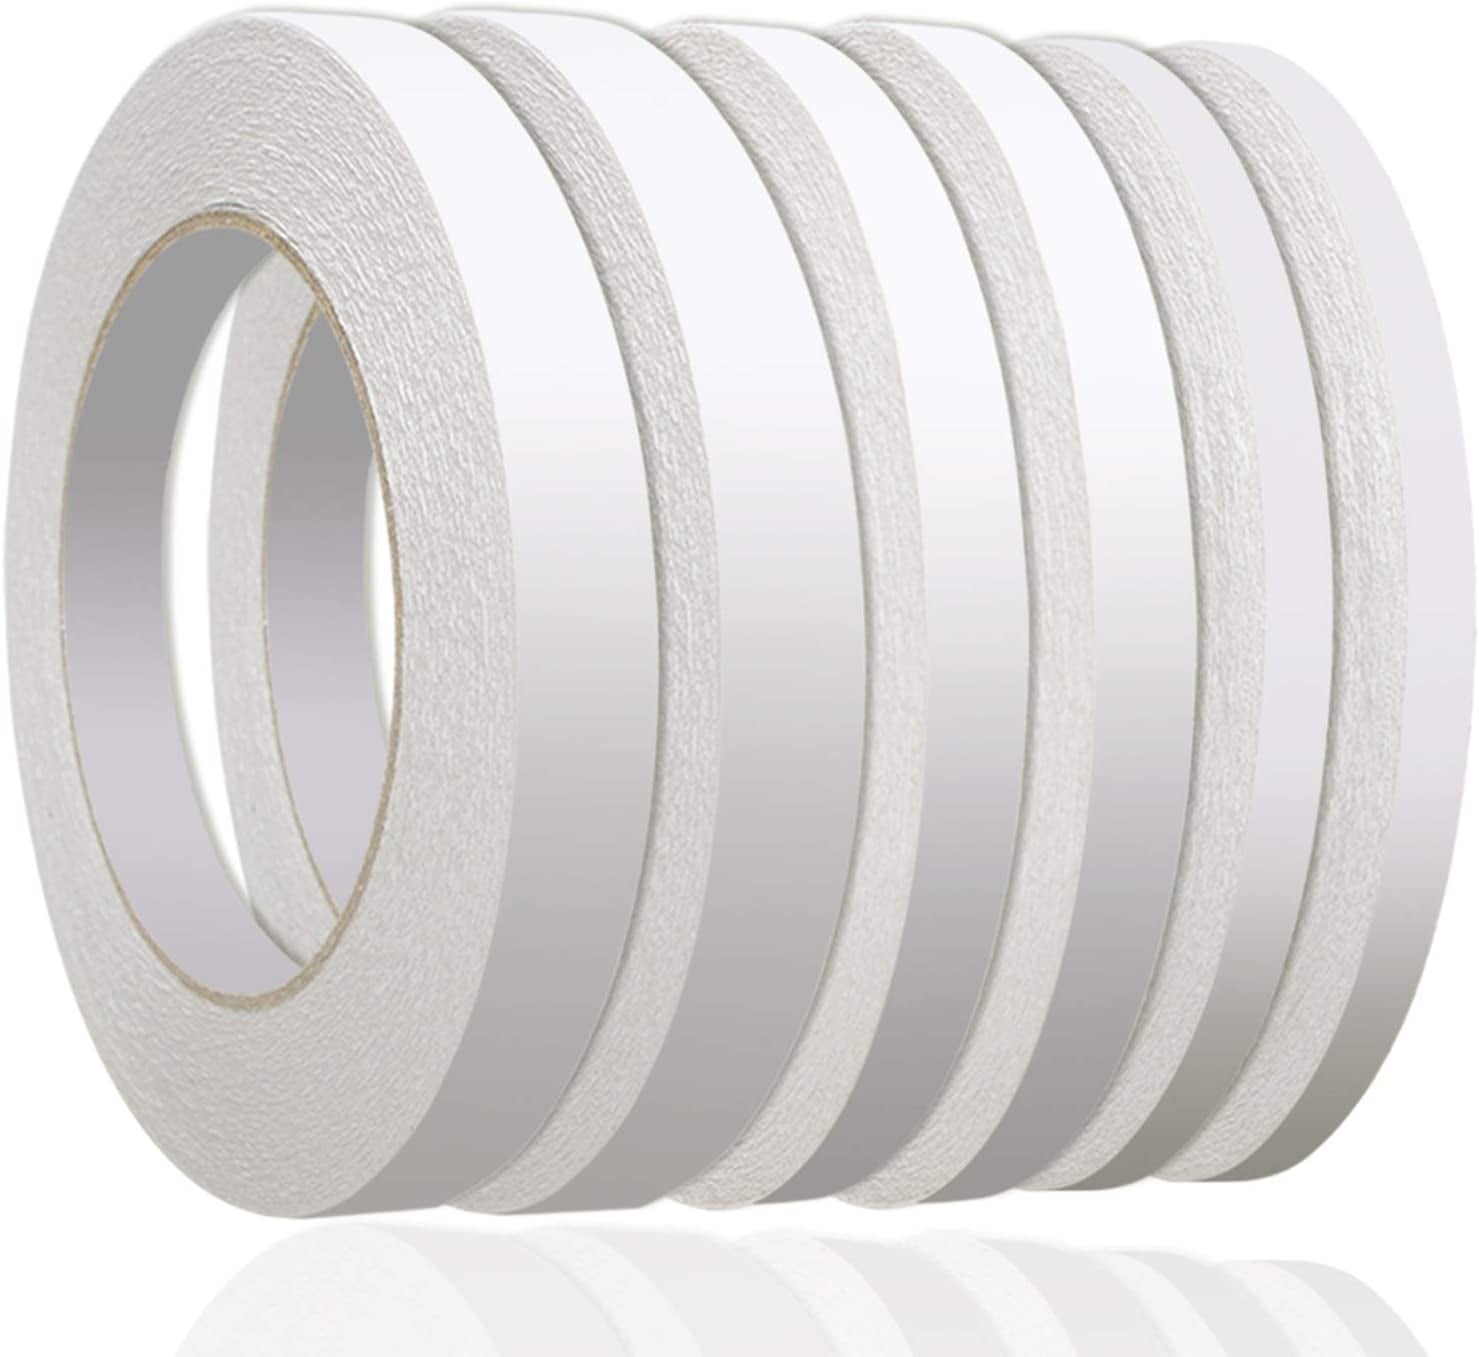  RUNROTOO 1 Roll High Viscosity Double-Sided Tape Scrapbooking  Dress Tape Double Sided for Fabric to Skin Double Sided mounting Tape Dual  Carpet Tape Double Sided Cloth Heavy Adhesive : Office Products